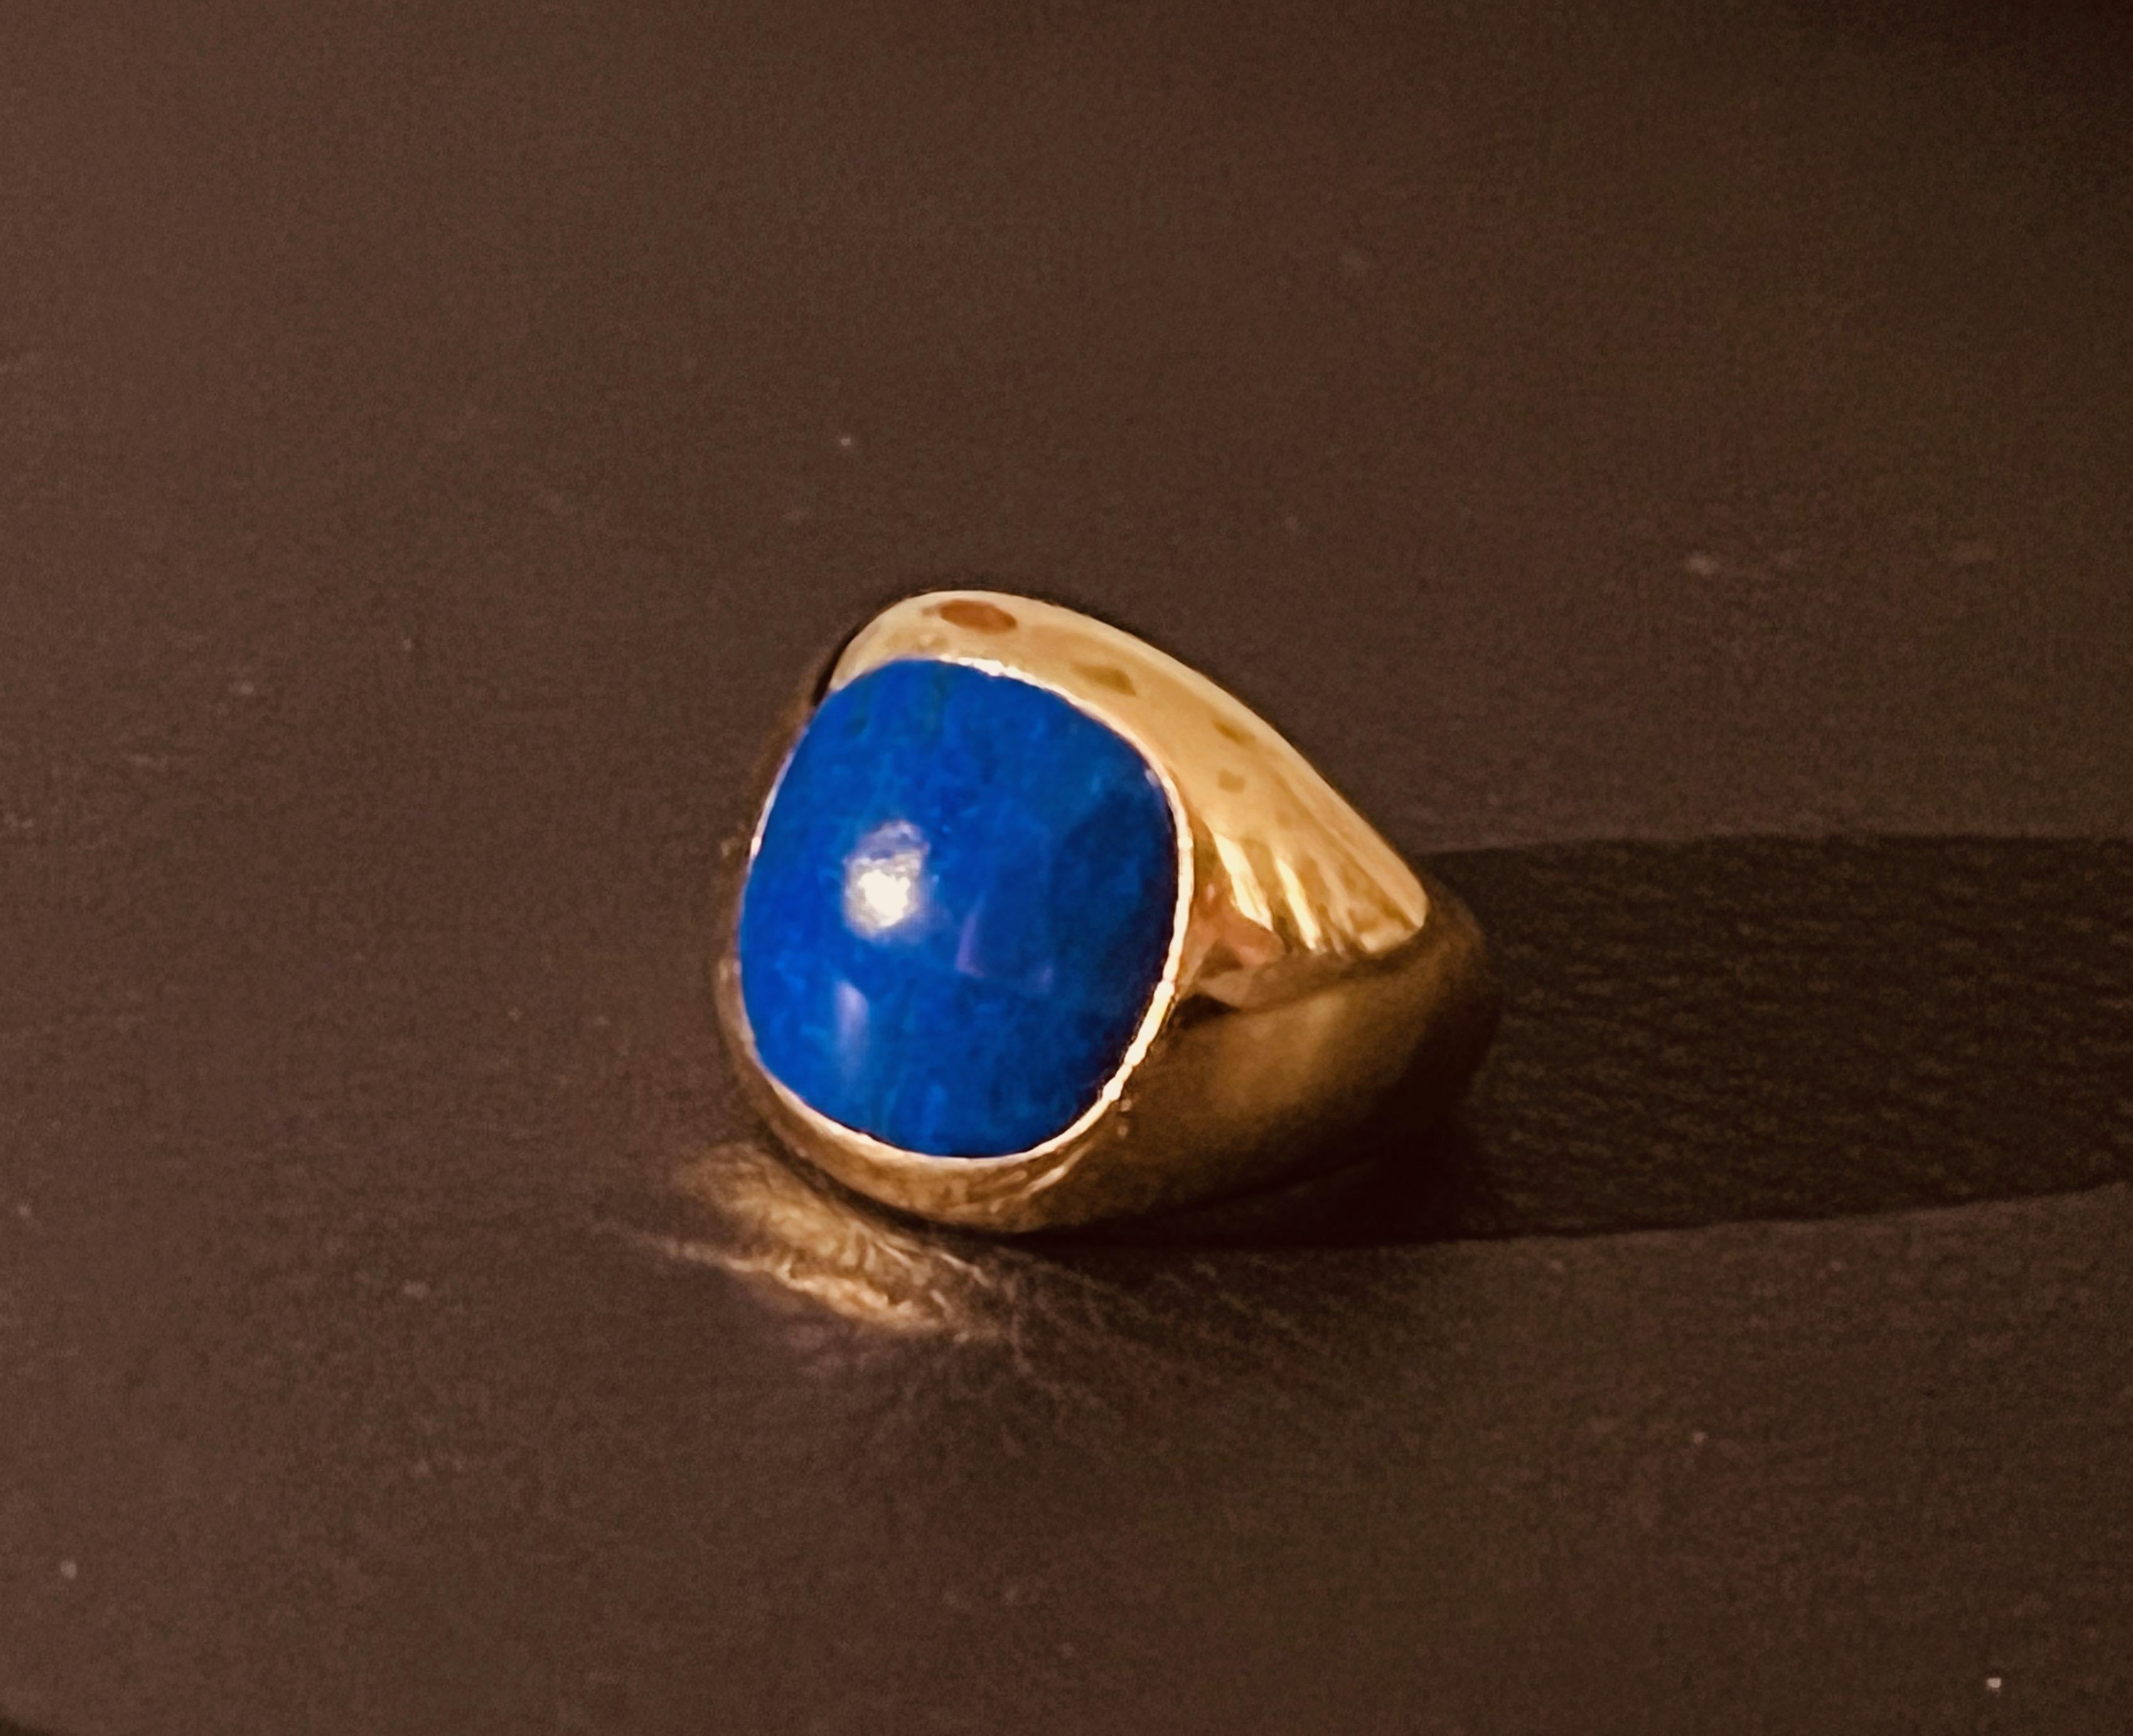 A Cushion Shaped Lapis Lazuli Mounted In a 18 Carat Yellow Gold Signet Ring  For Sale 1